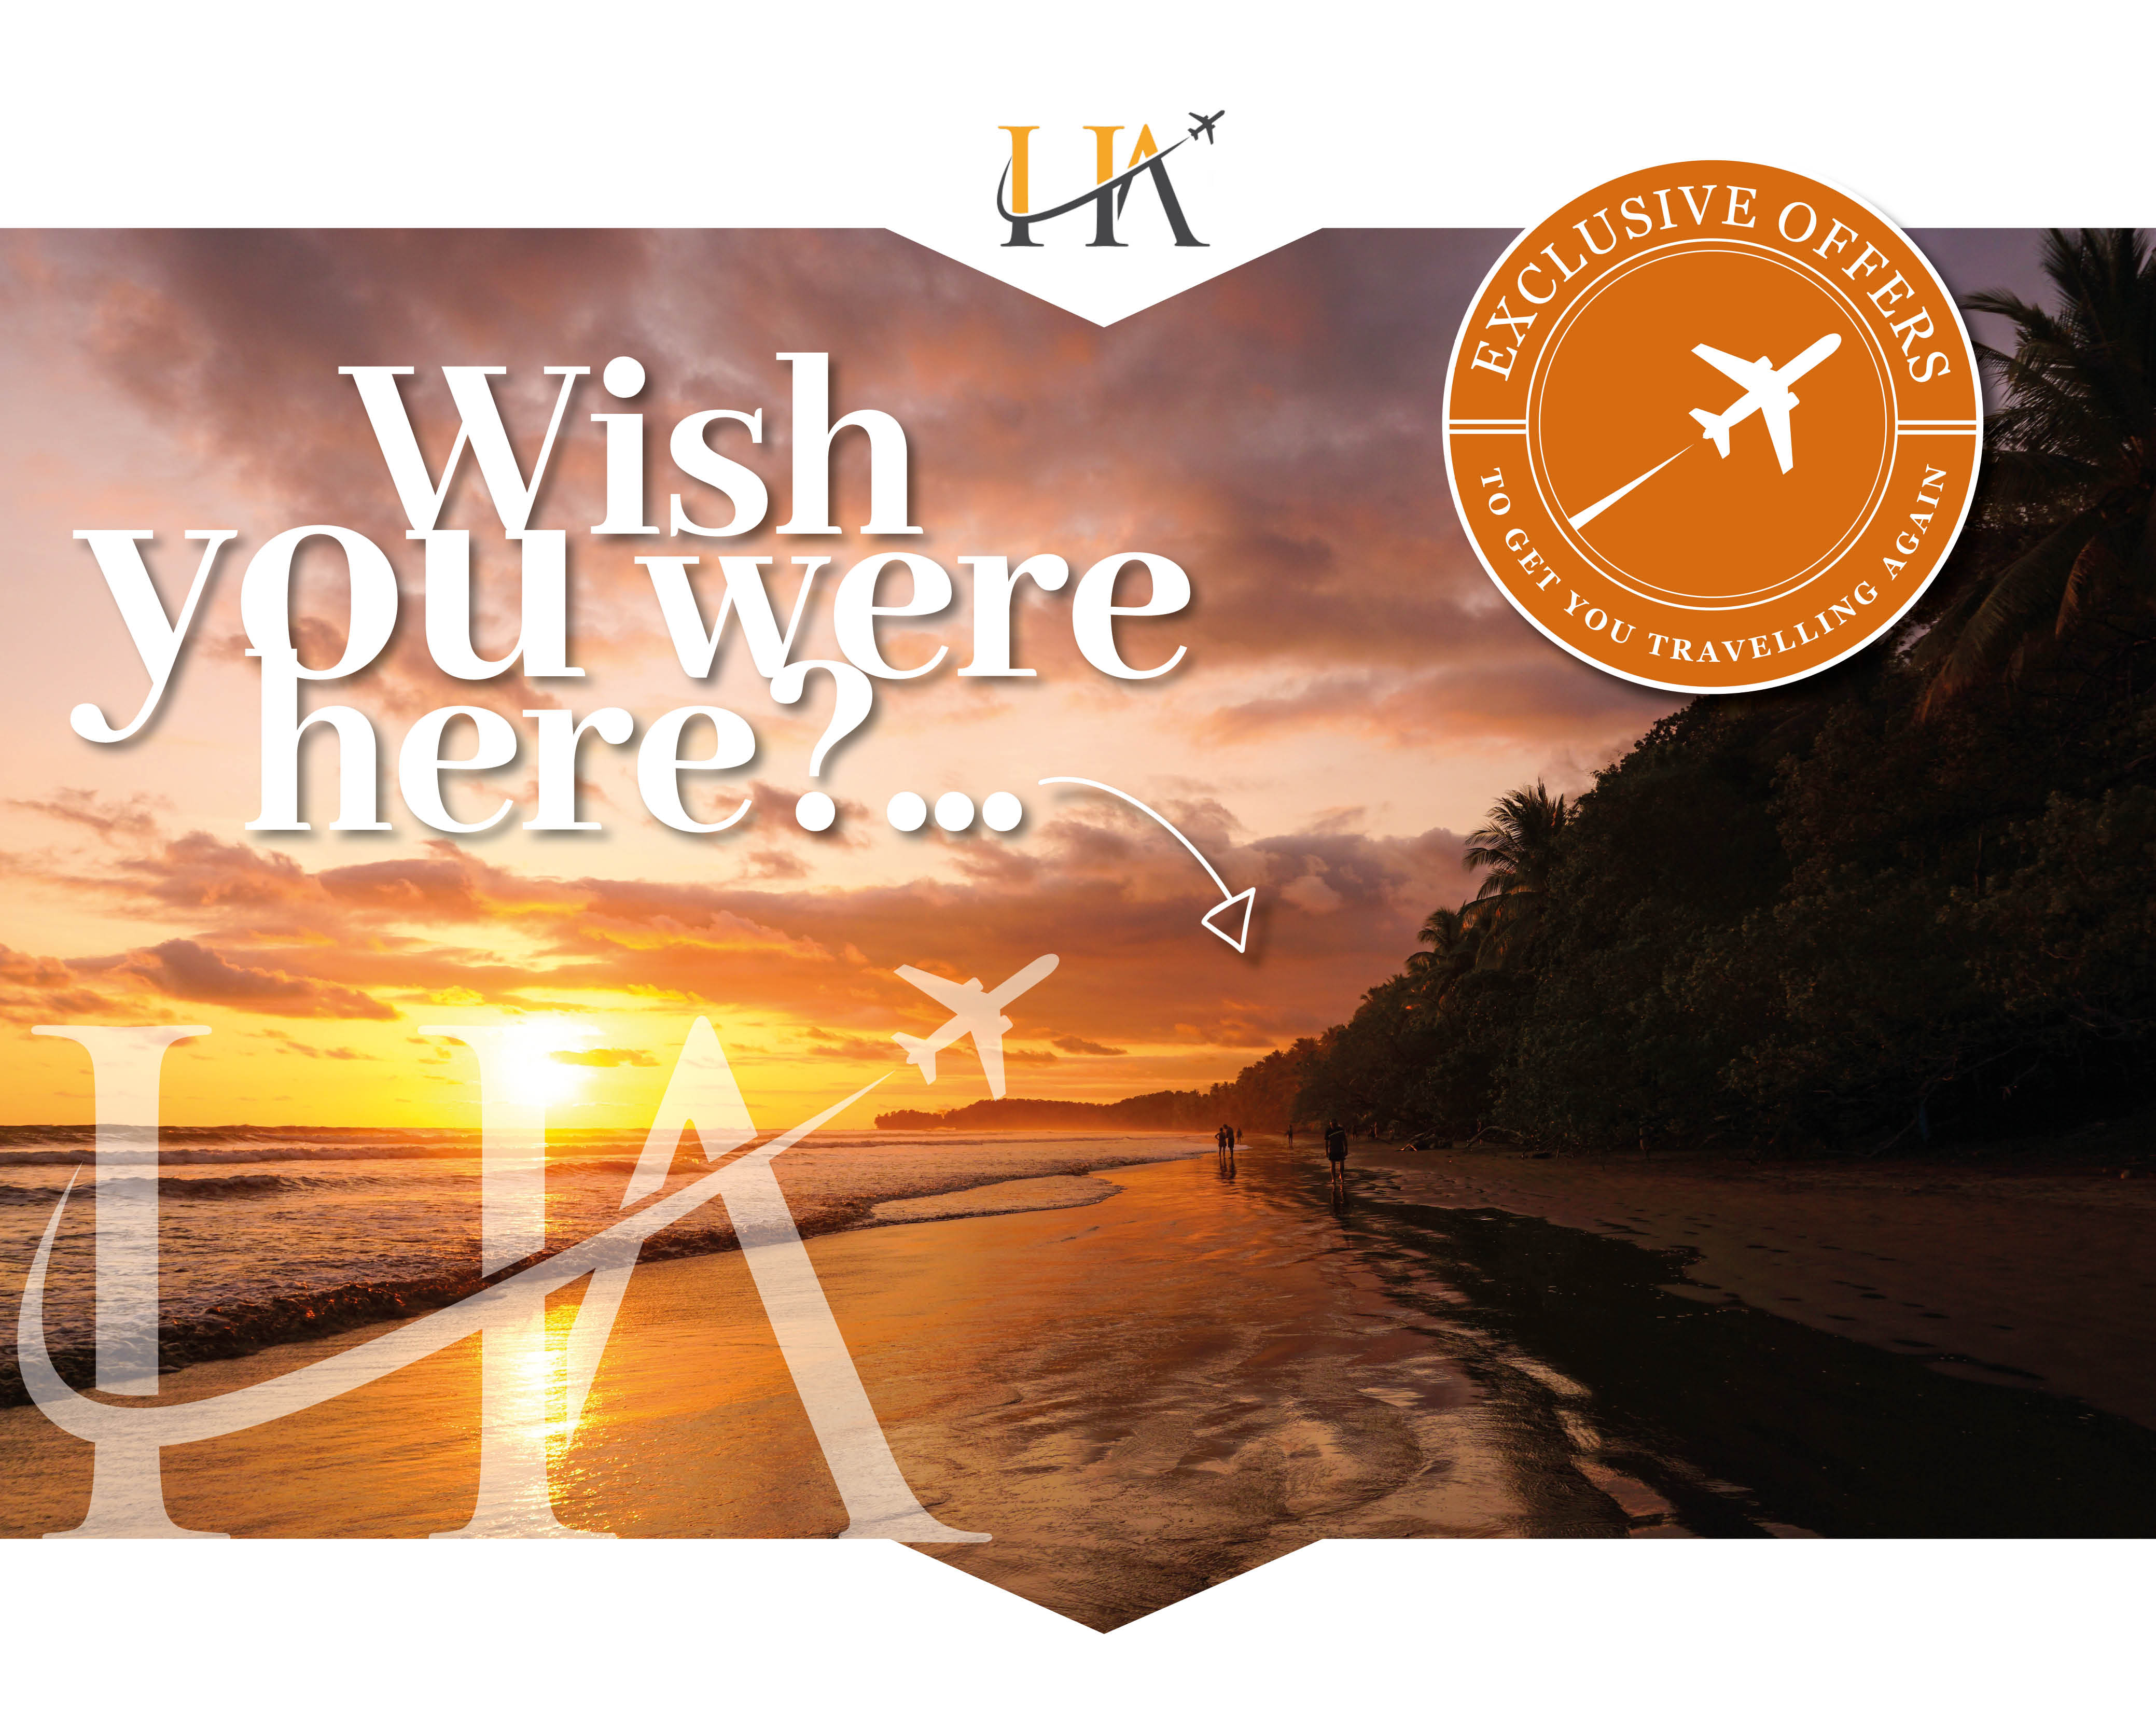 Wish you were here? Holiday offers